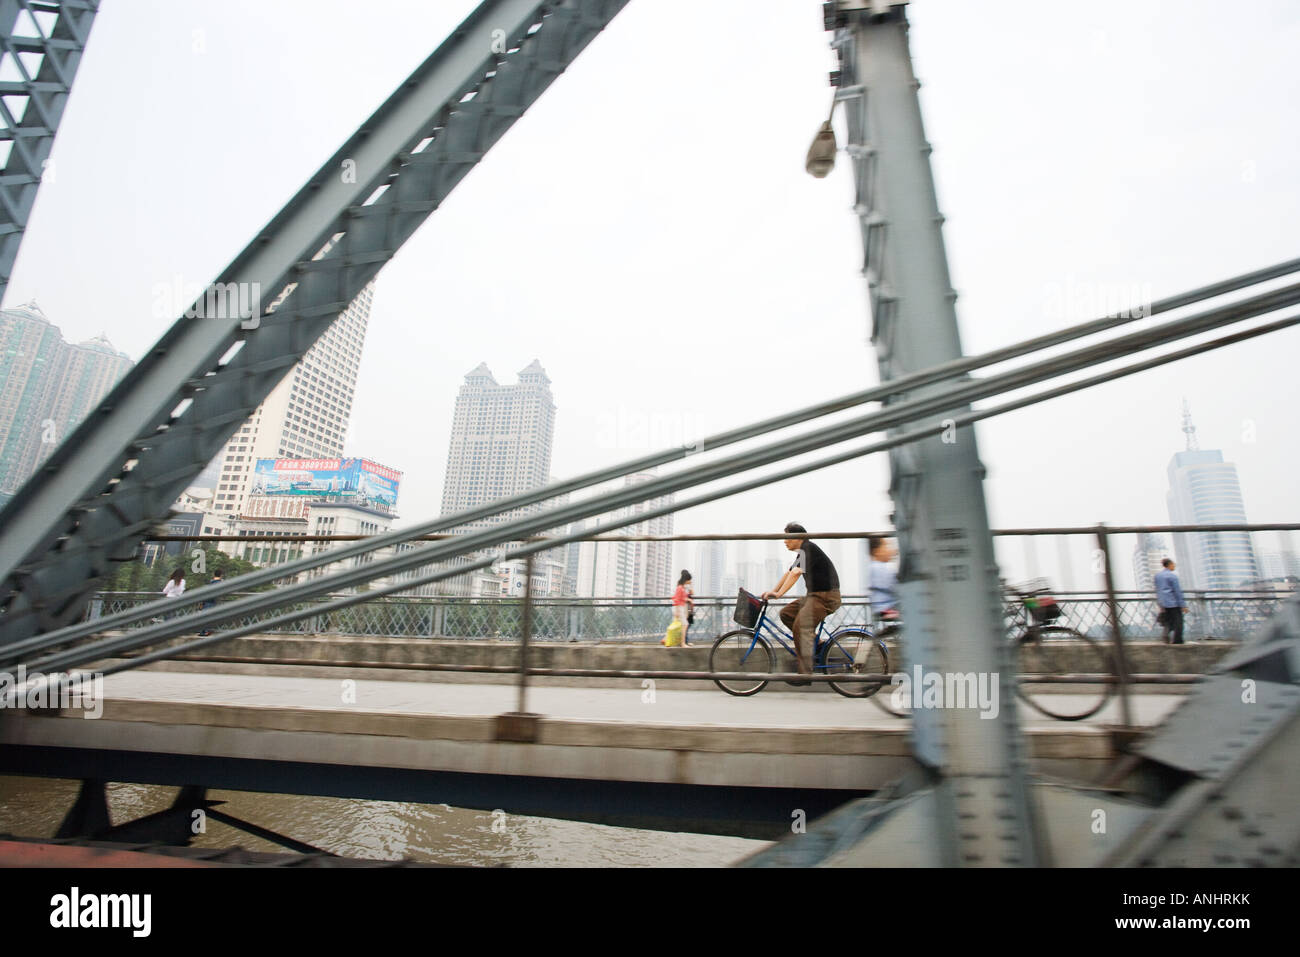 Cyclists and pedestrians on footbridge, cityscape in background Stock Photo